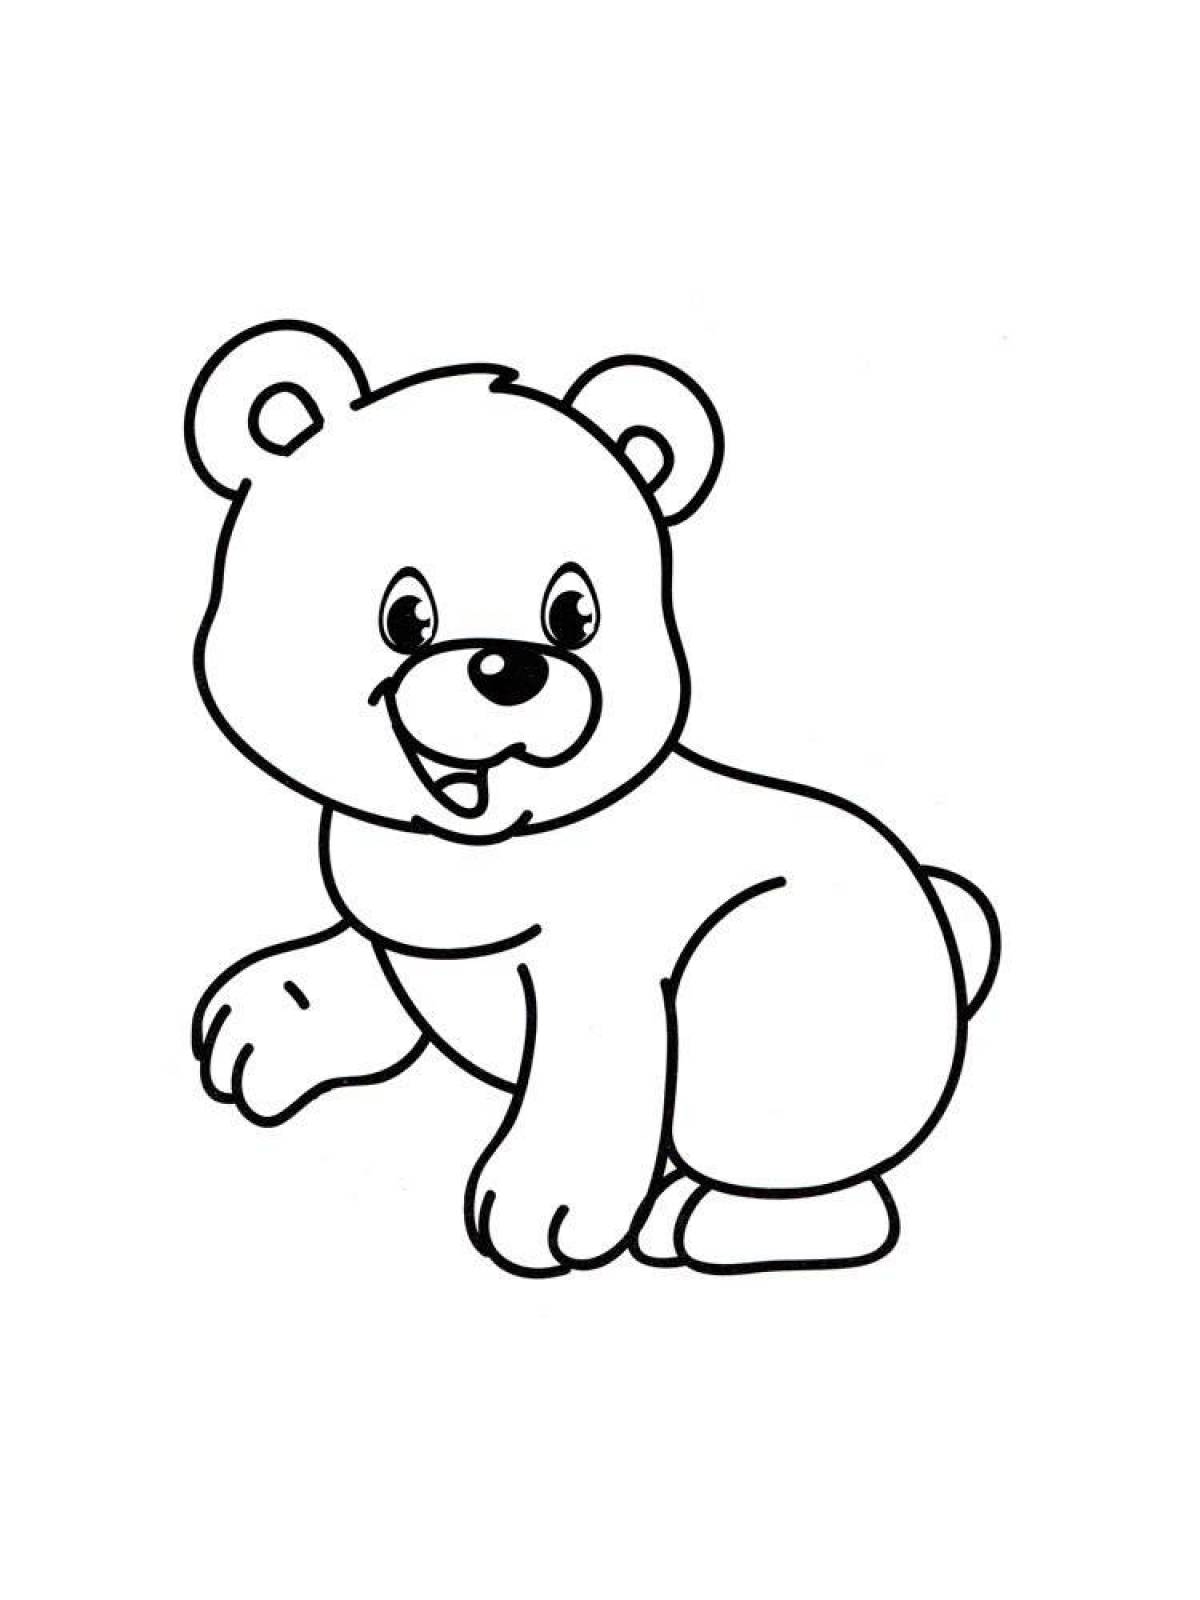 Coloring playful bear for kids